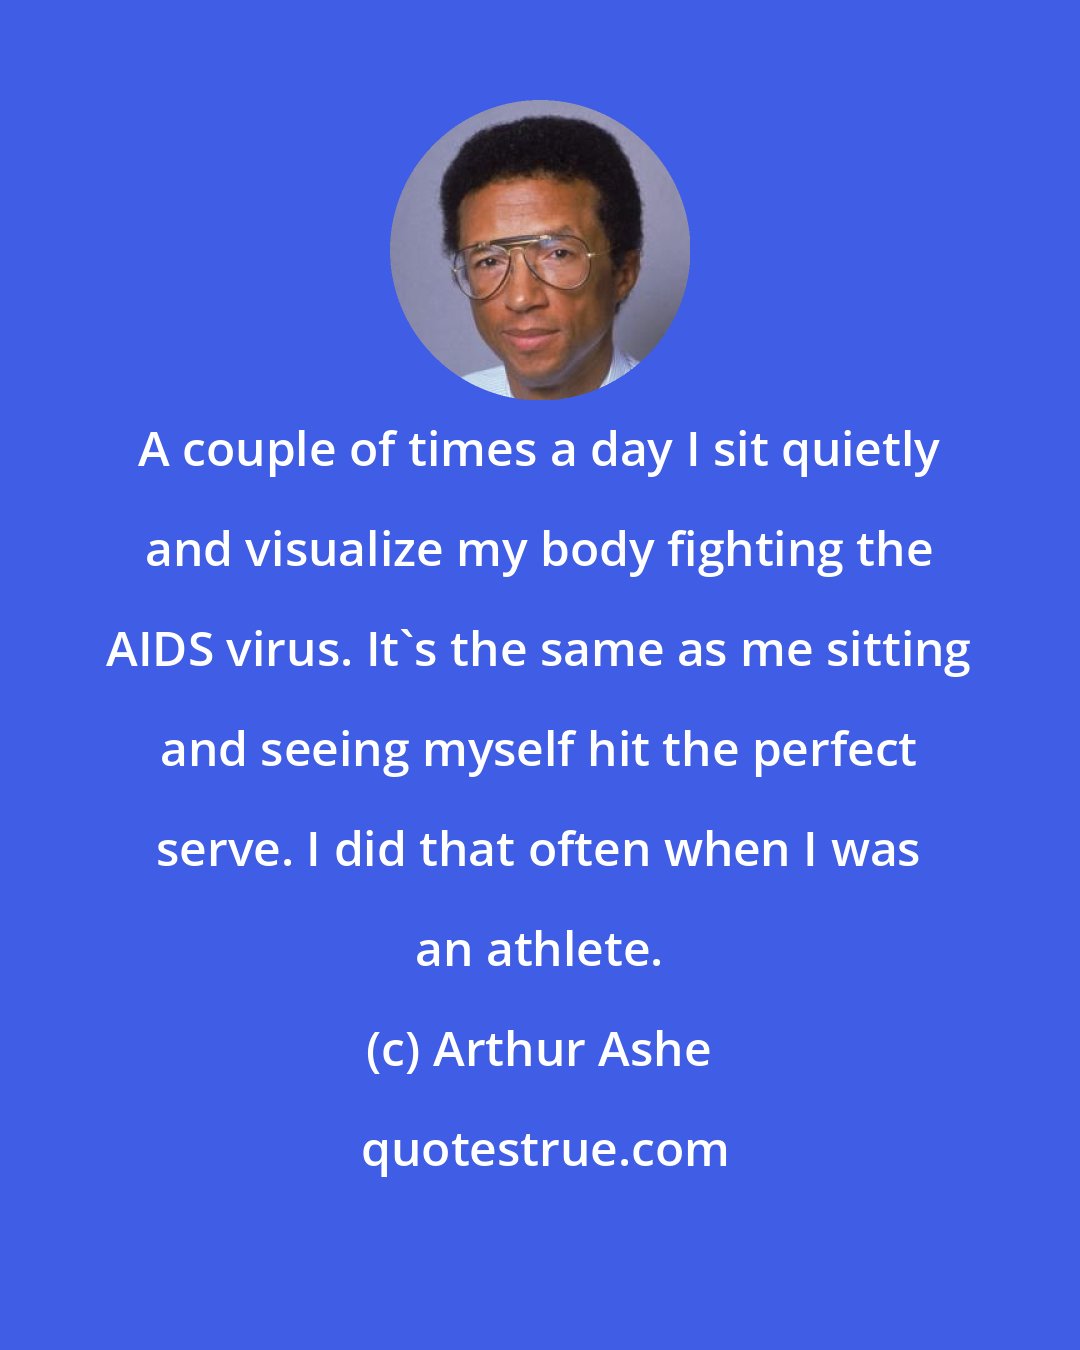 Arthur Ashe: A couple of times a day I sit quietly and visualize my body fighting the AIDS virus. It's the same as me sitting and seeing myself hit the perfect serve. I did that often when I was an athlete.